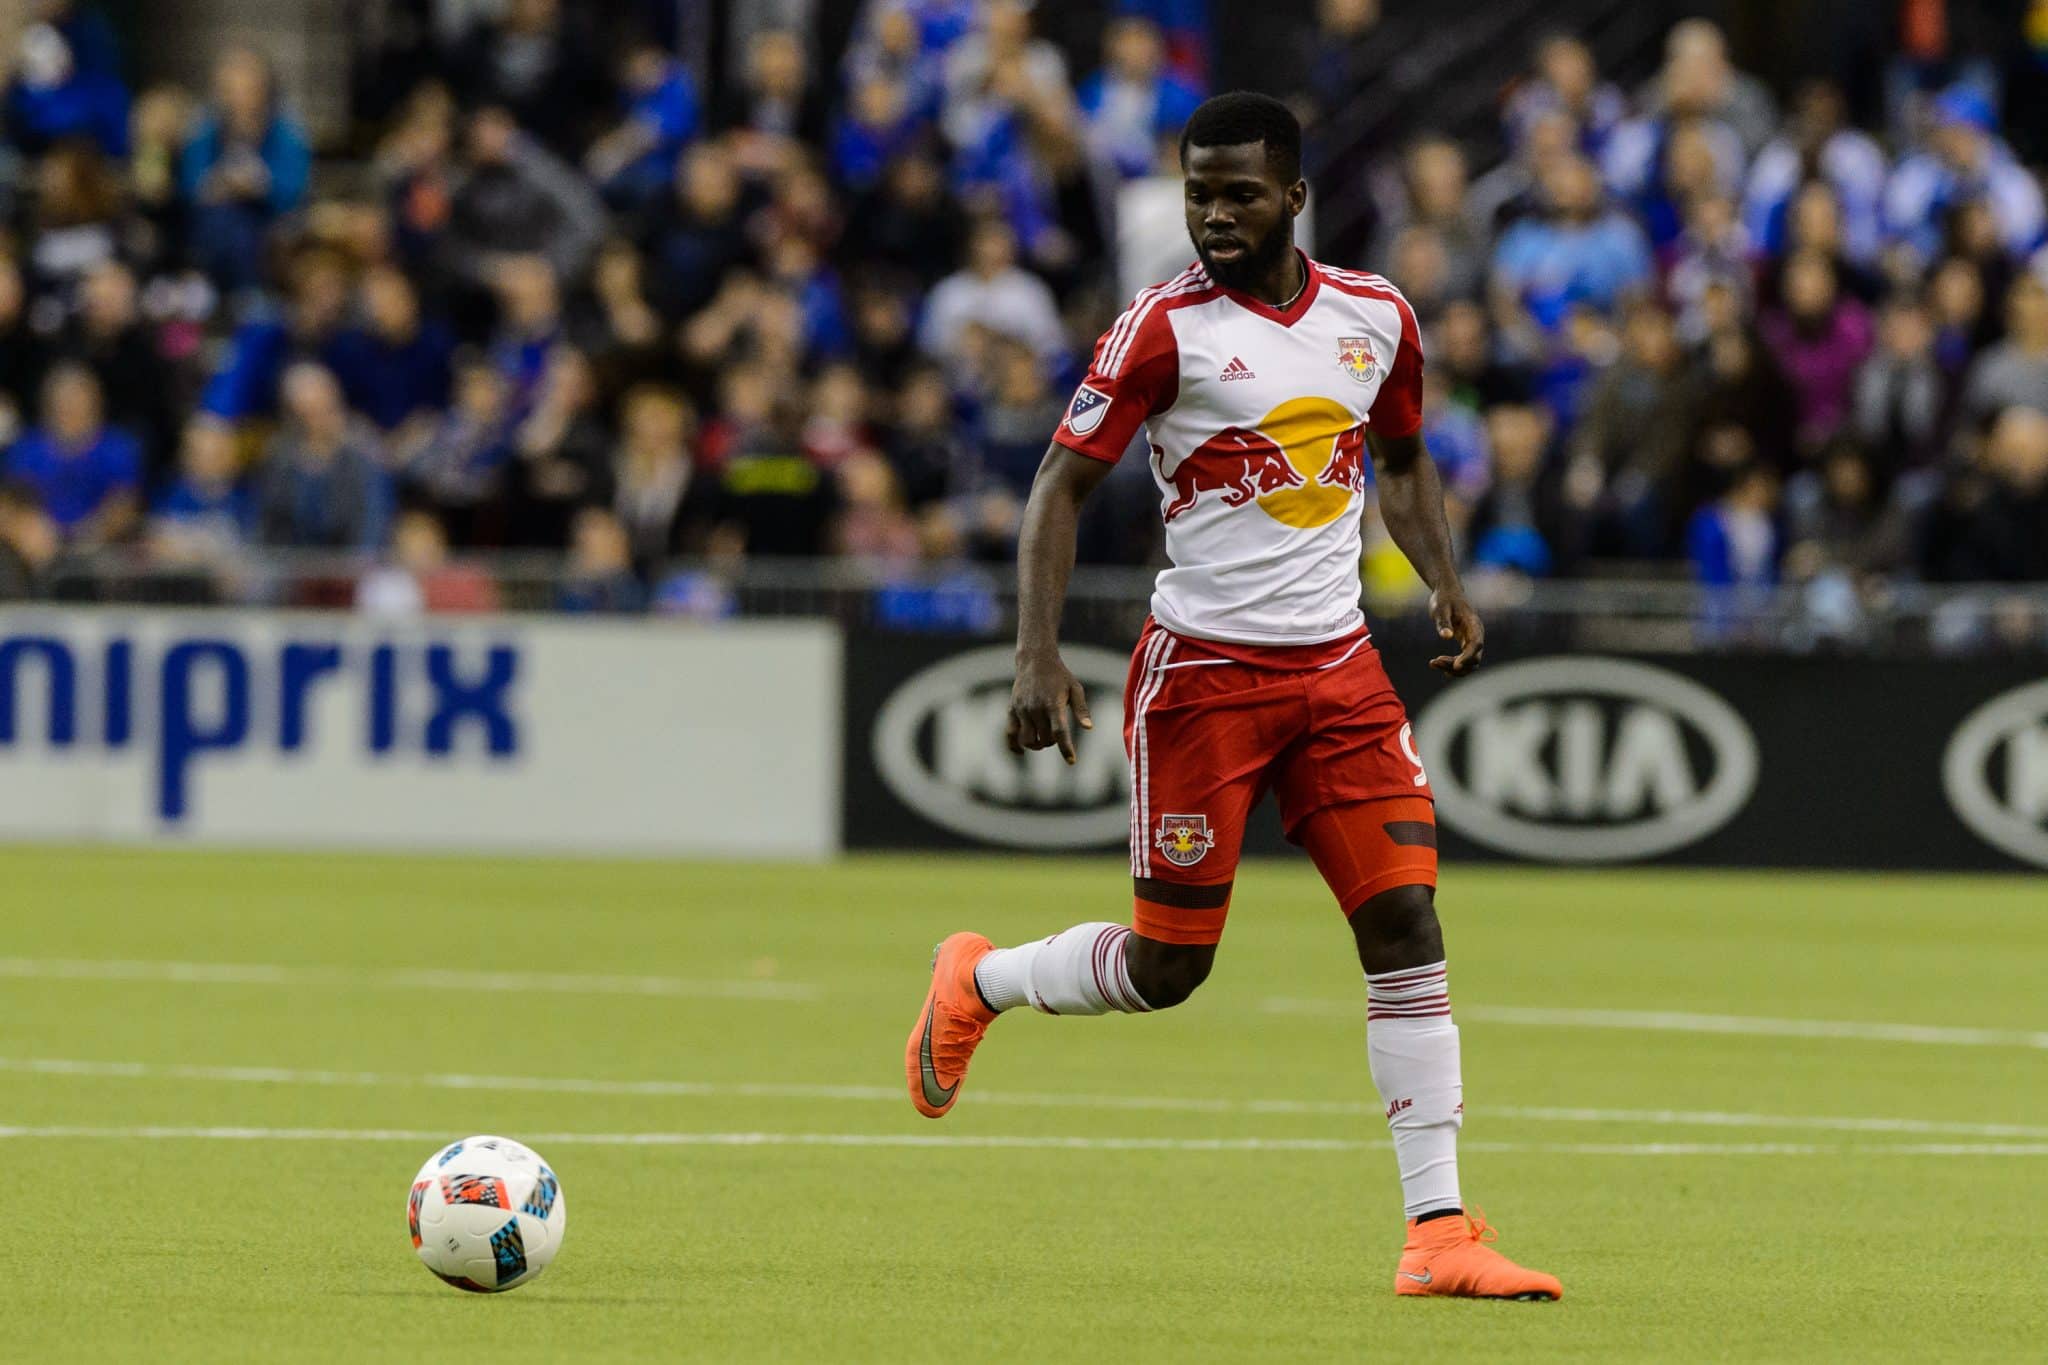 MONTREAL, QC - MARCH 12: Kemar Lawrence #92 of the New York Red Bulls runs with the ball during the MLS game against the Montreal Impact at the Olympic Stadium on March 12, 2016 in Montreal, Quebec, Canada. The Montreal Impact defeated the New York Red Bulls 3-0.